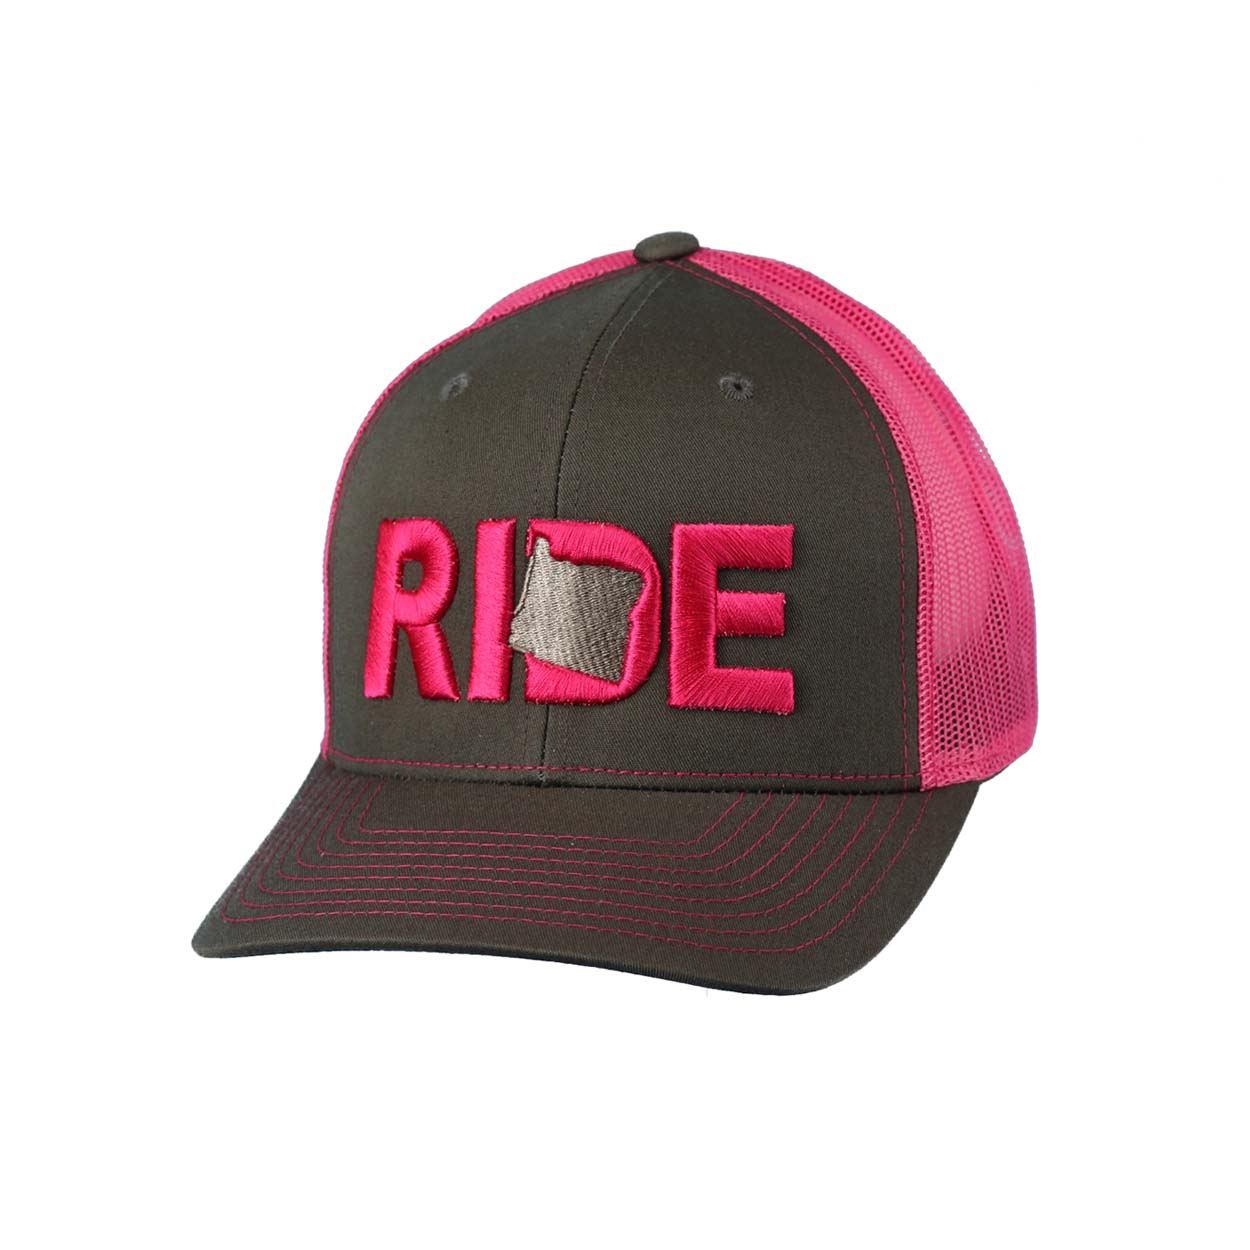 Ride Oregon Classic Embroidered Snapback Trucker Hat Gray/Pink